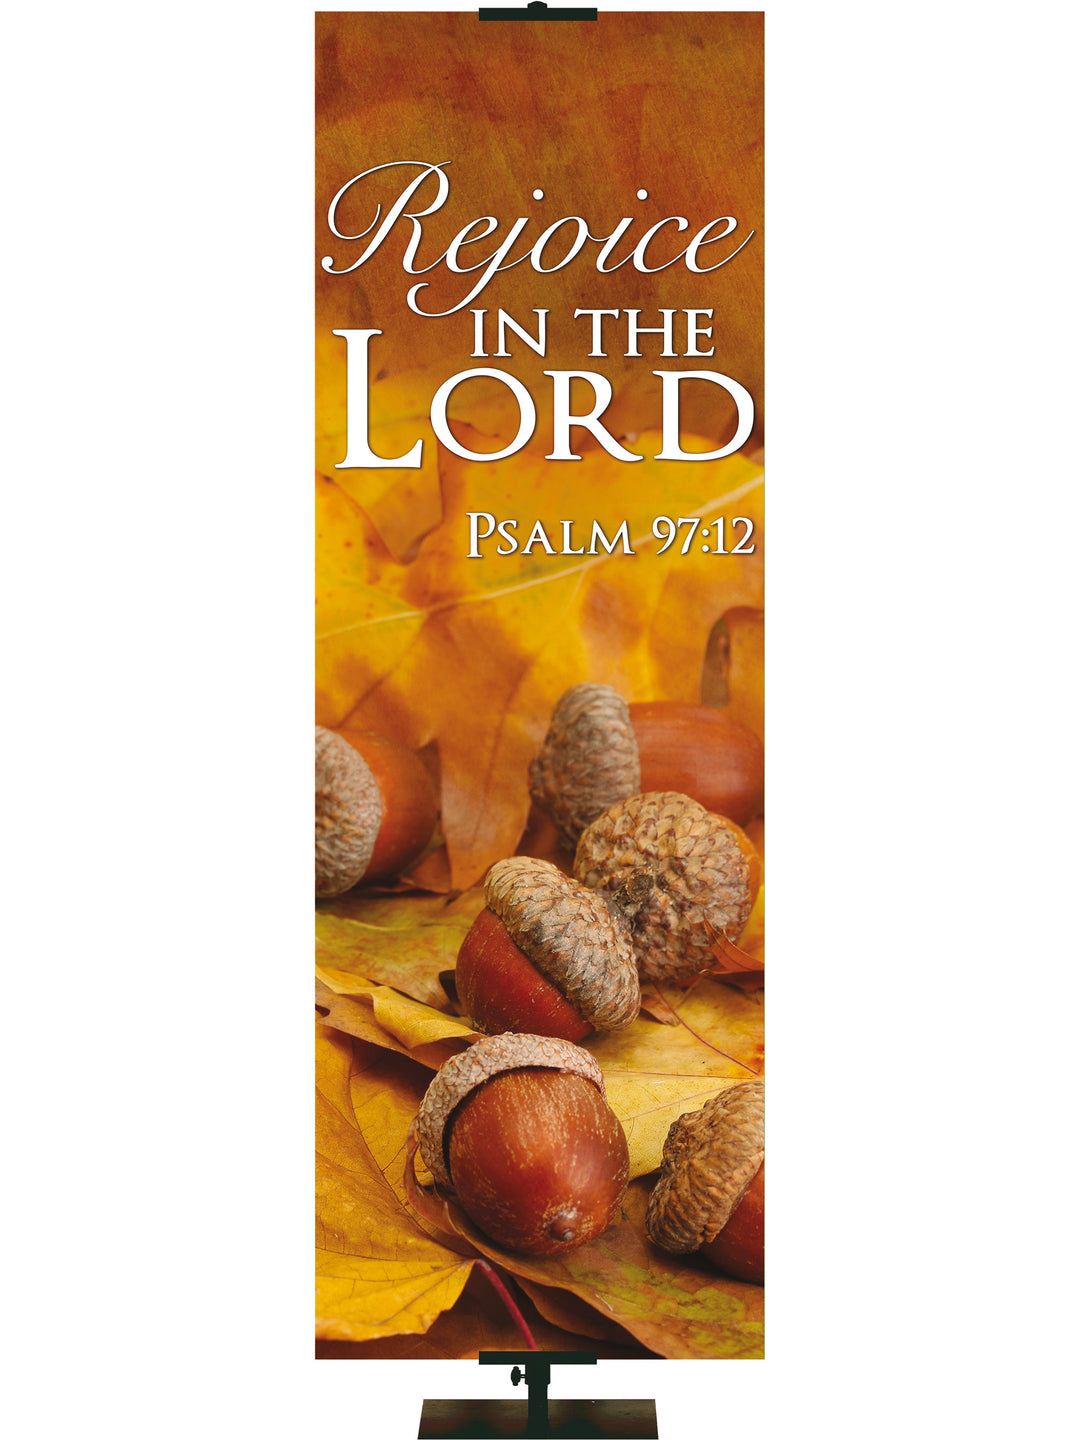 Contemporary Fall & Thanksgiving Rejoice in the Lord Design 2 Psalm 97:12 - Fall Banners - PraiseBanners